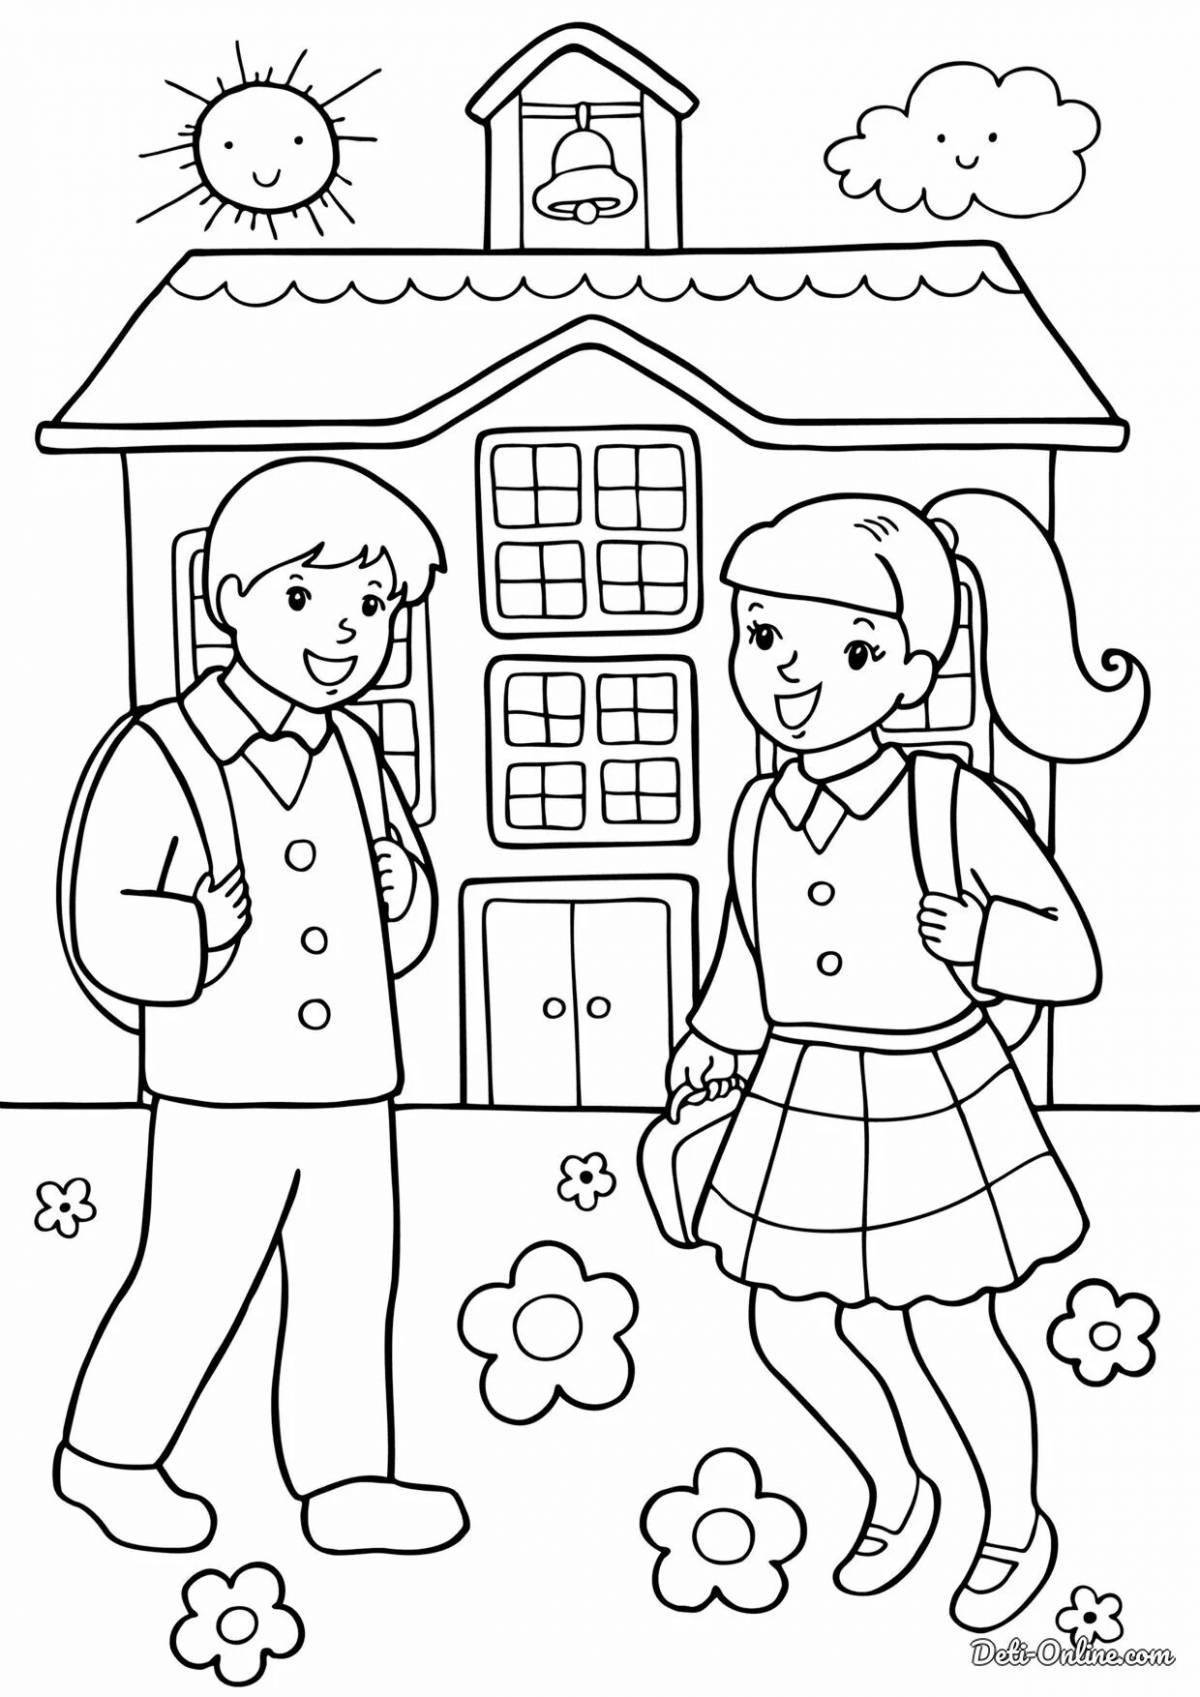 Coloring page blessed first of september